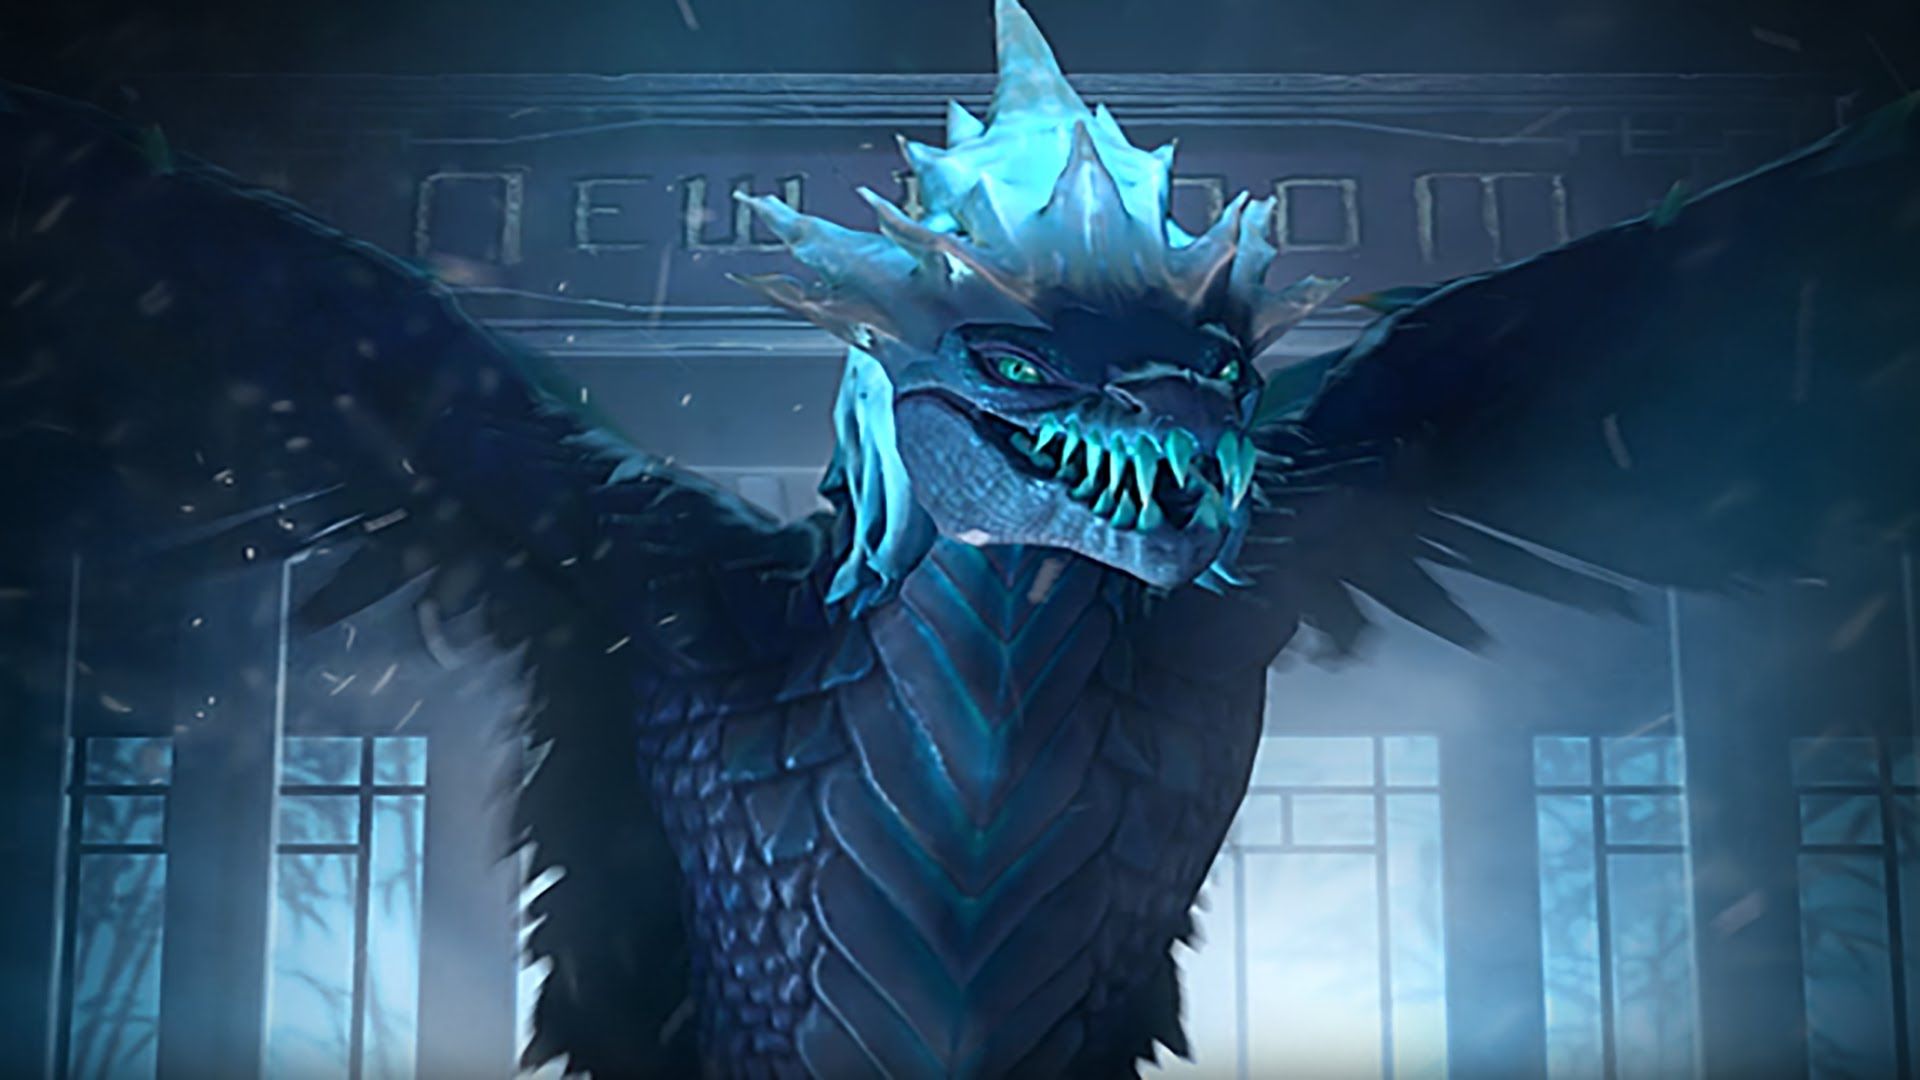 Winter Wyvern screenshots, image and picture